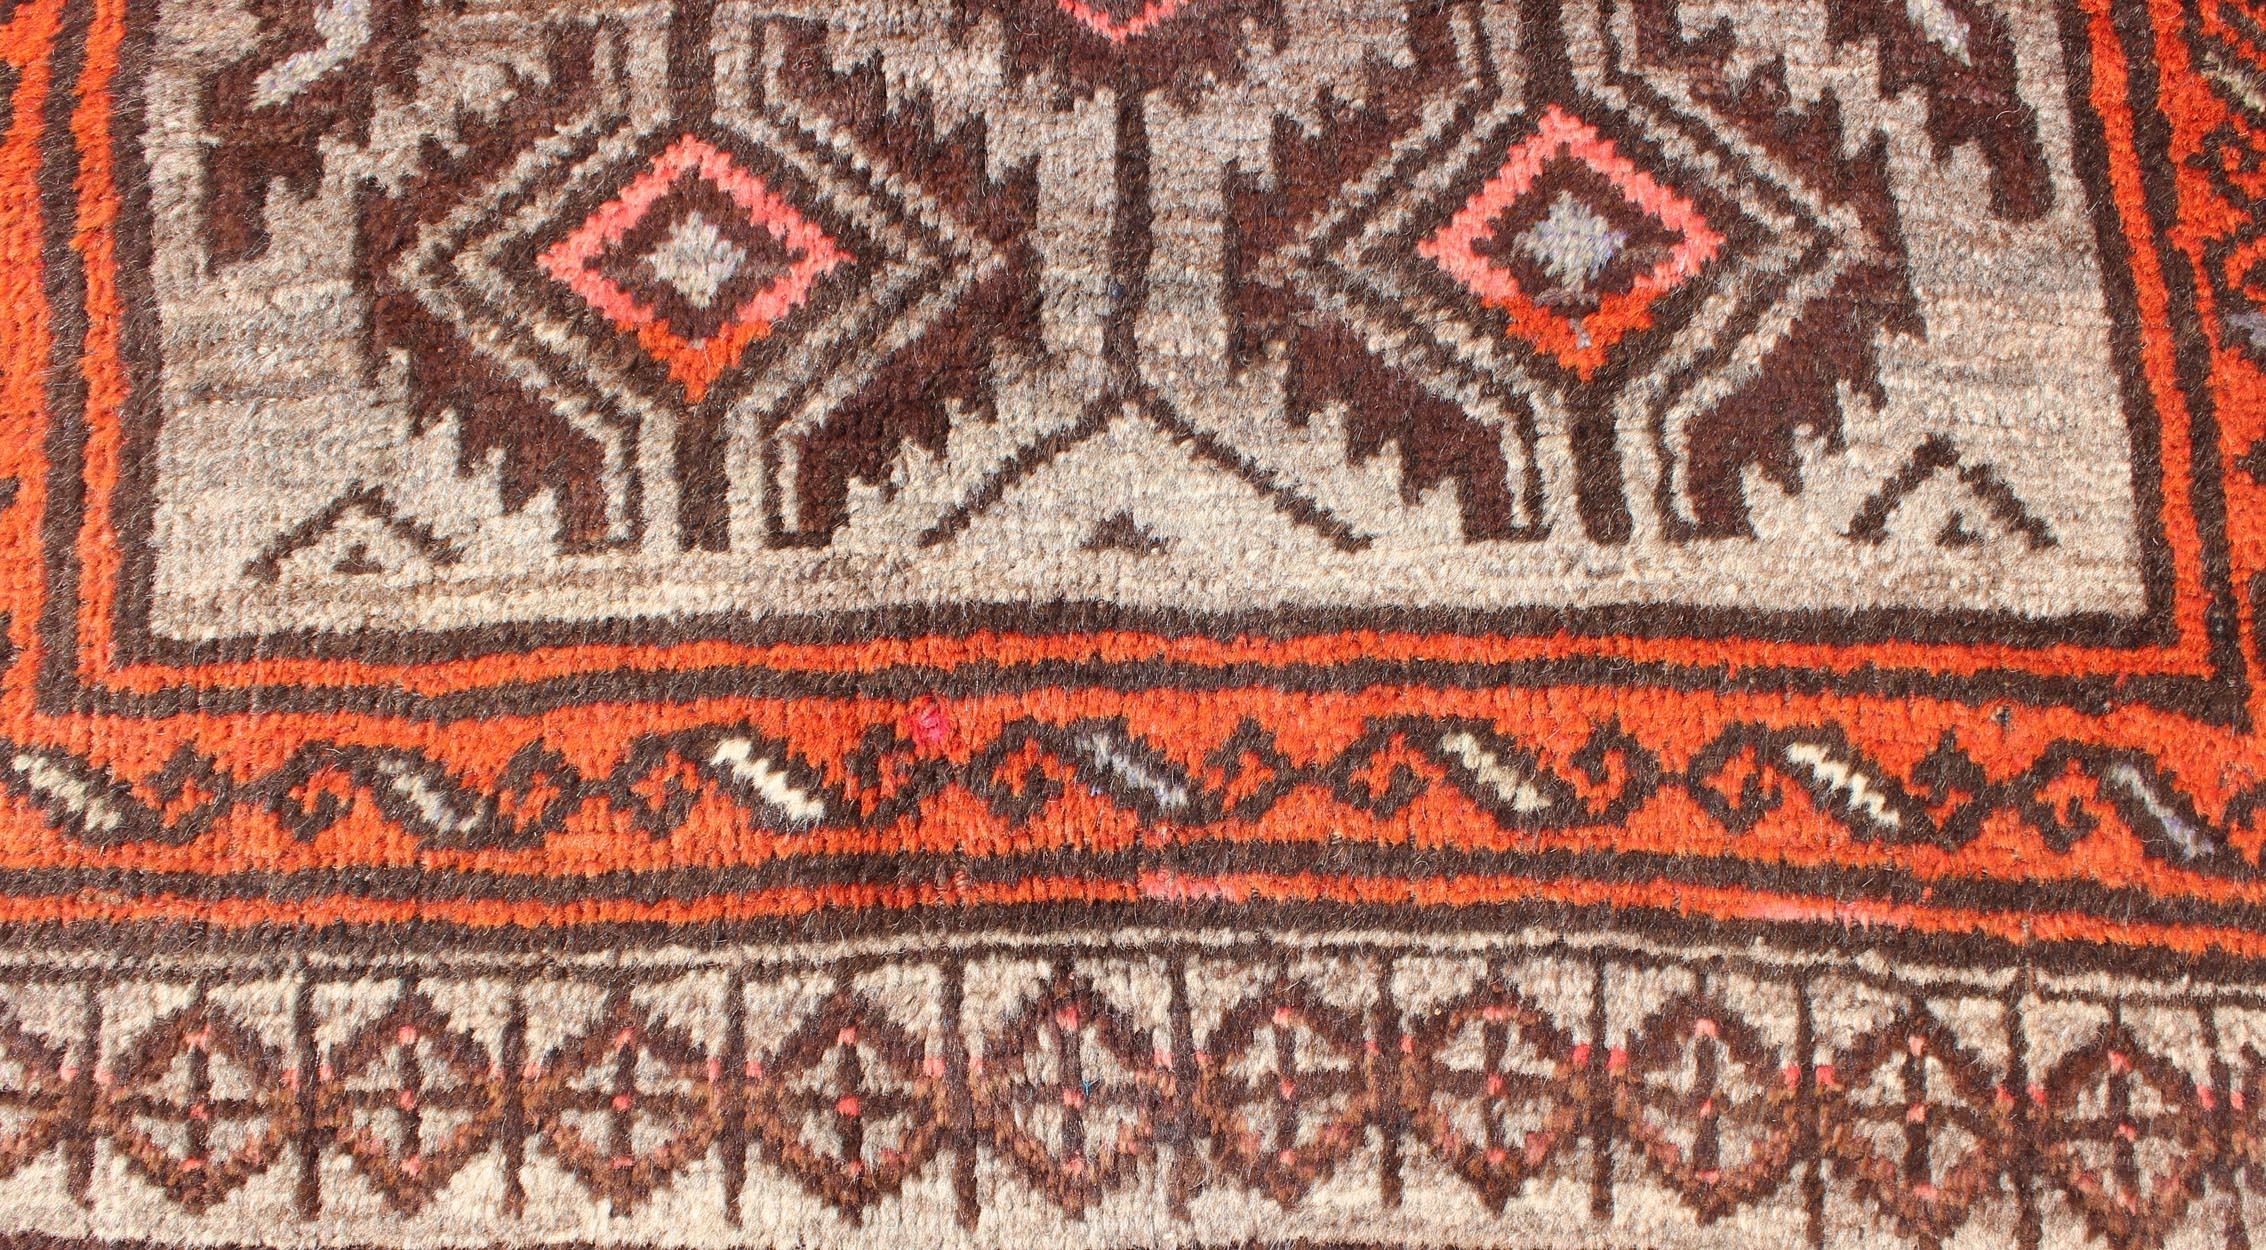 Mid-20th Century Vintage Persian Shiraz Rug in Burnt Orange and Brown with Tribal Medallions For Sale